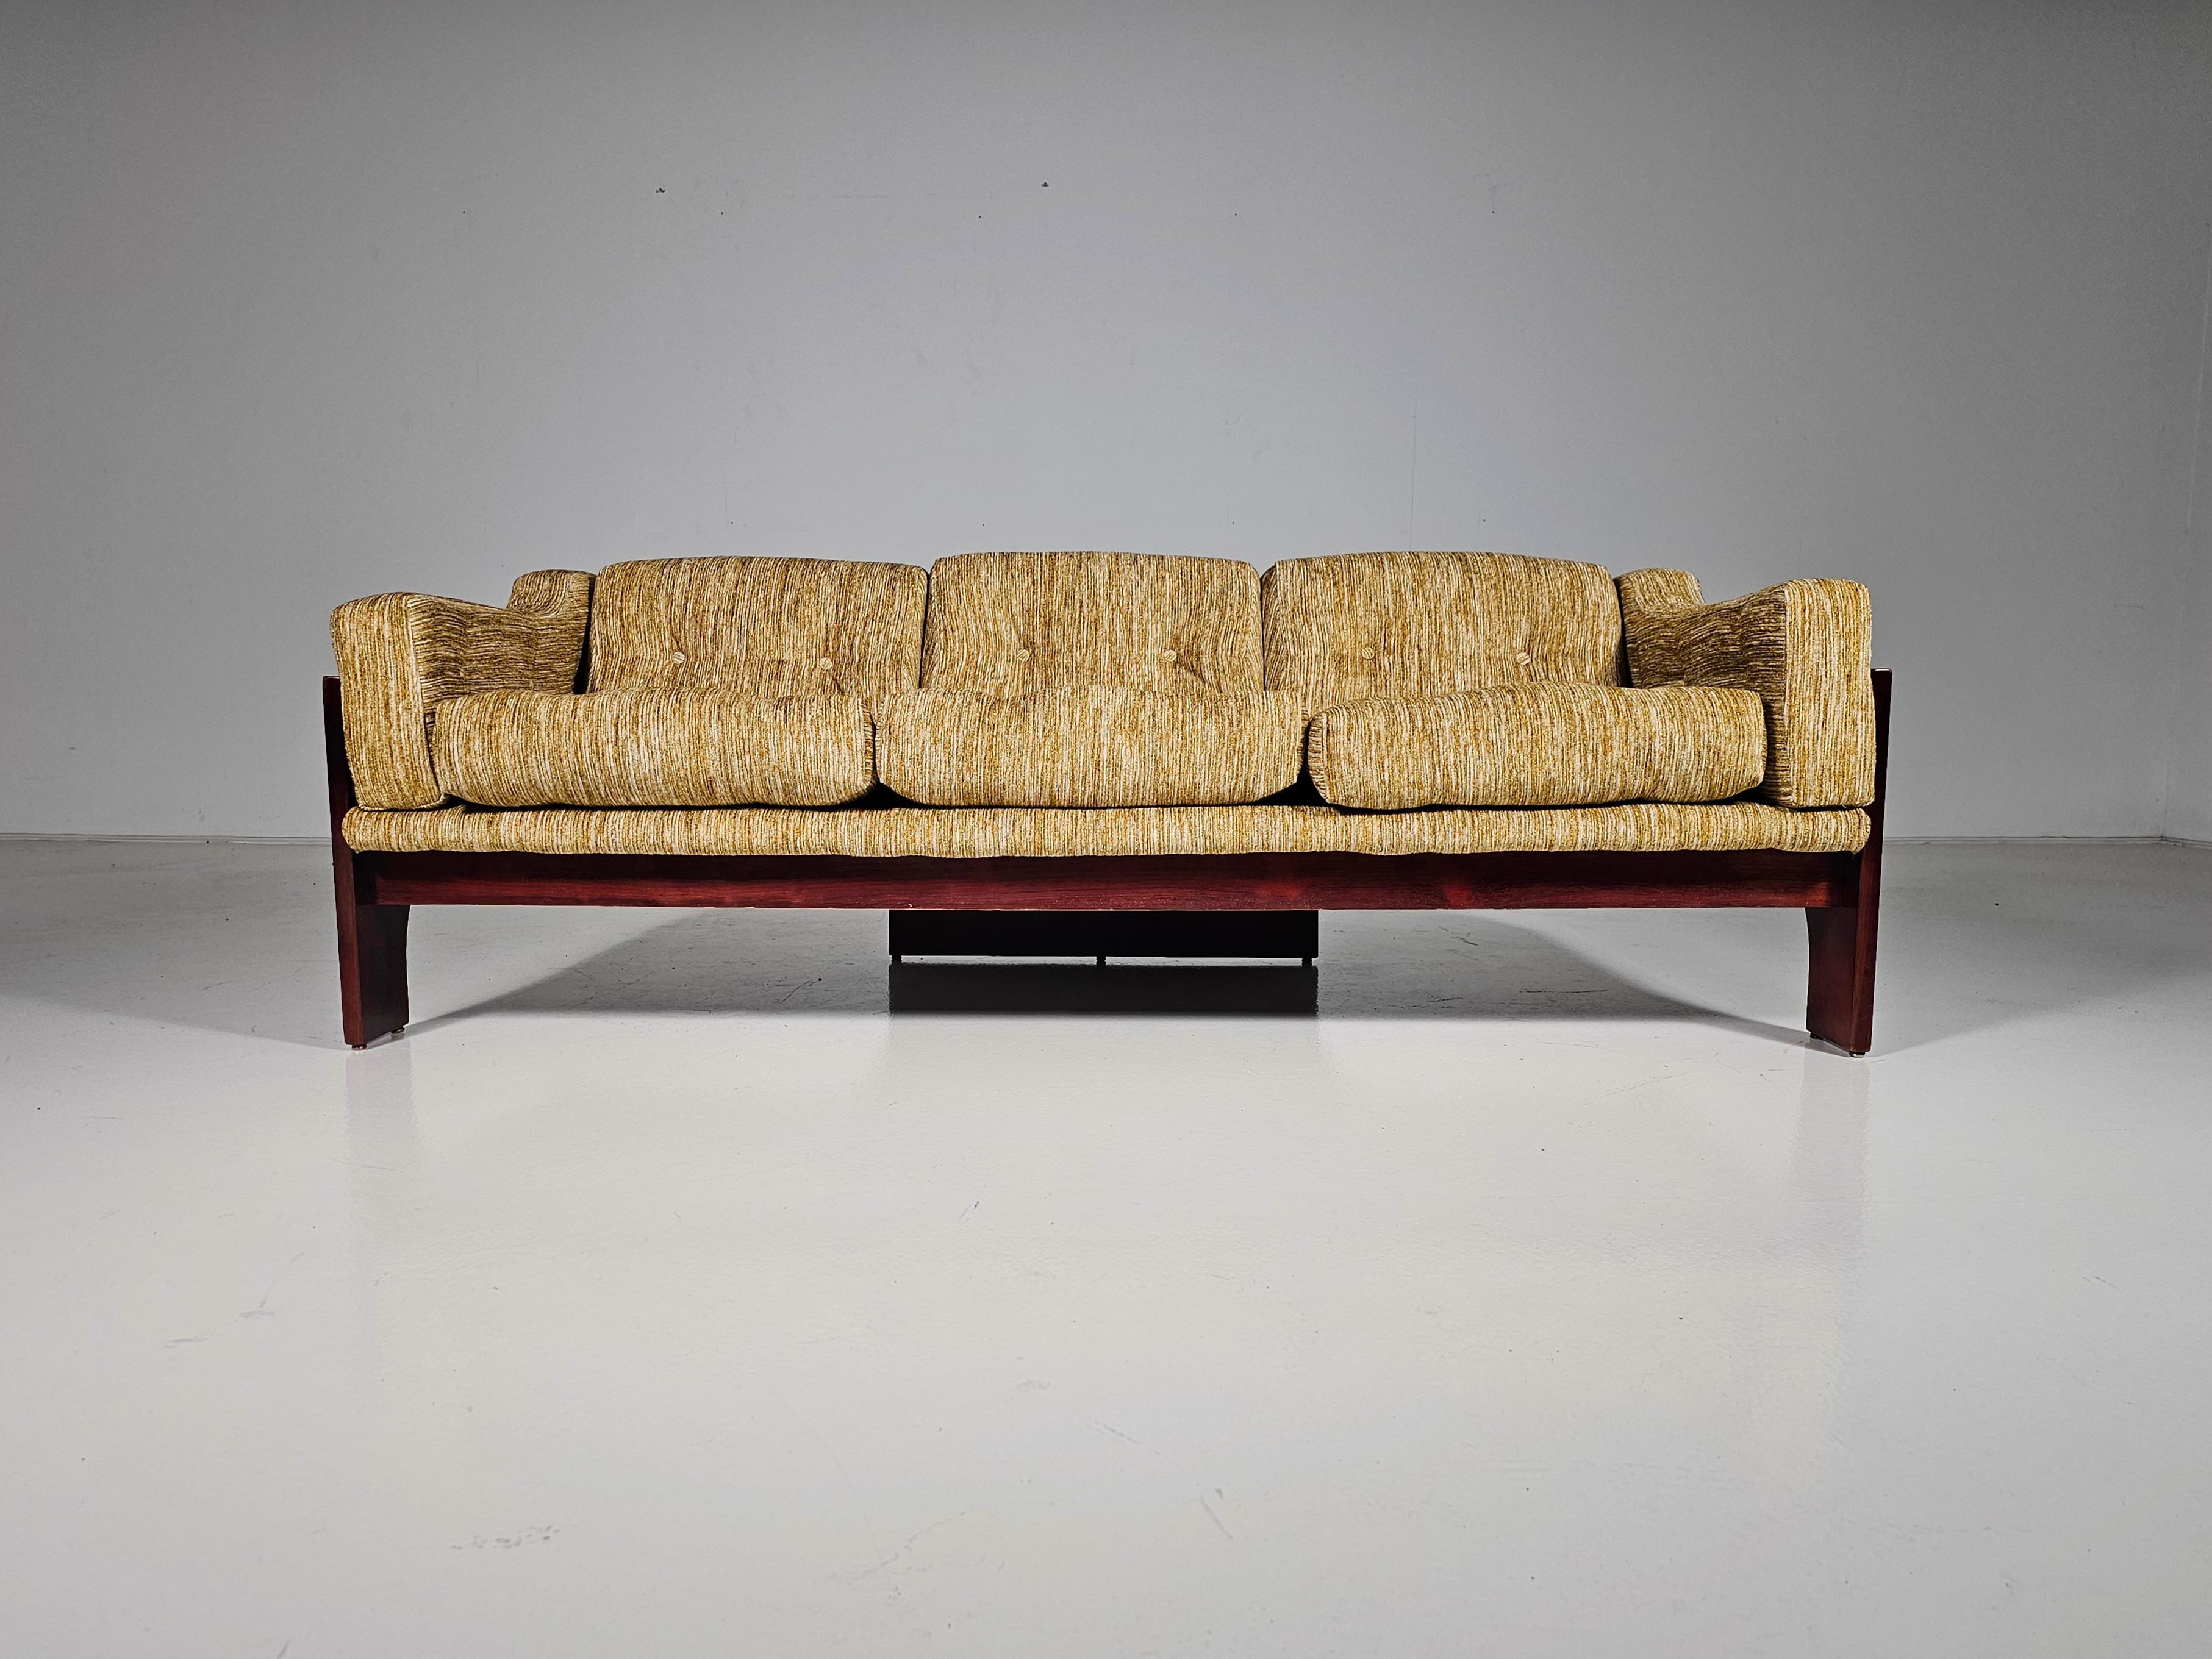 The Oriolo three-seater sofa was designed by Claudio Salocchi and is an iconic piece of Italian design. Crafted in the 1960s by Sormani, this sofa stands out with its bold lines and exceptional comfort, thanks to its enveloping armrests and padded